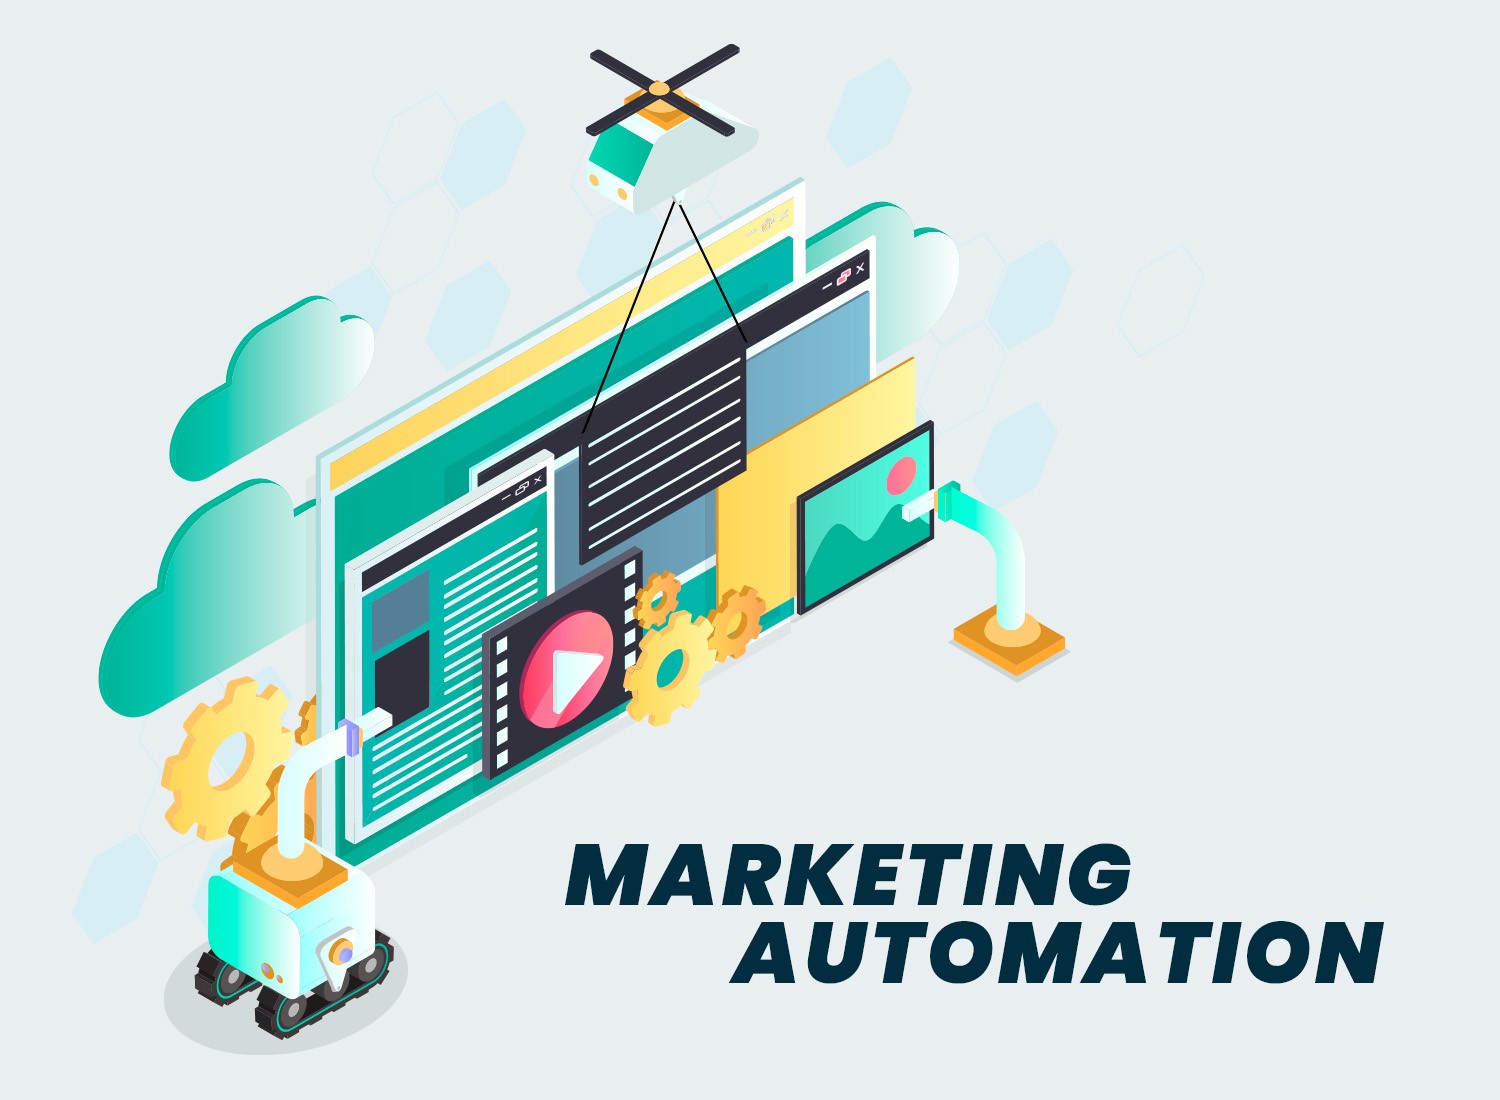 Featured image for “Marketing Automation”